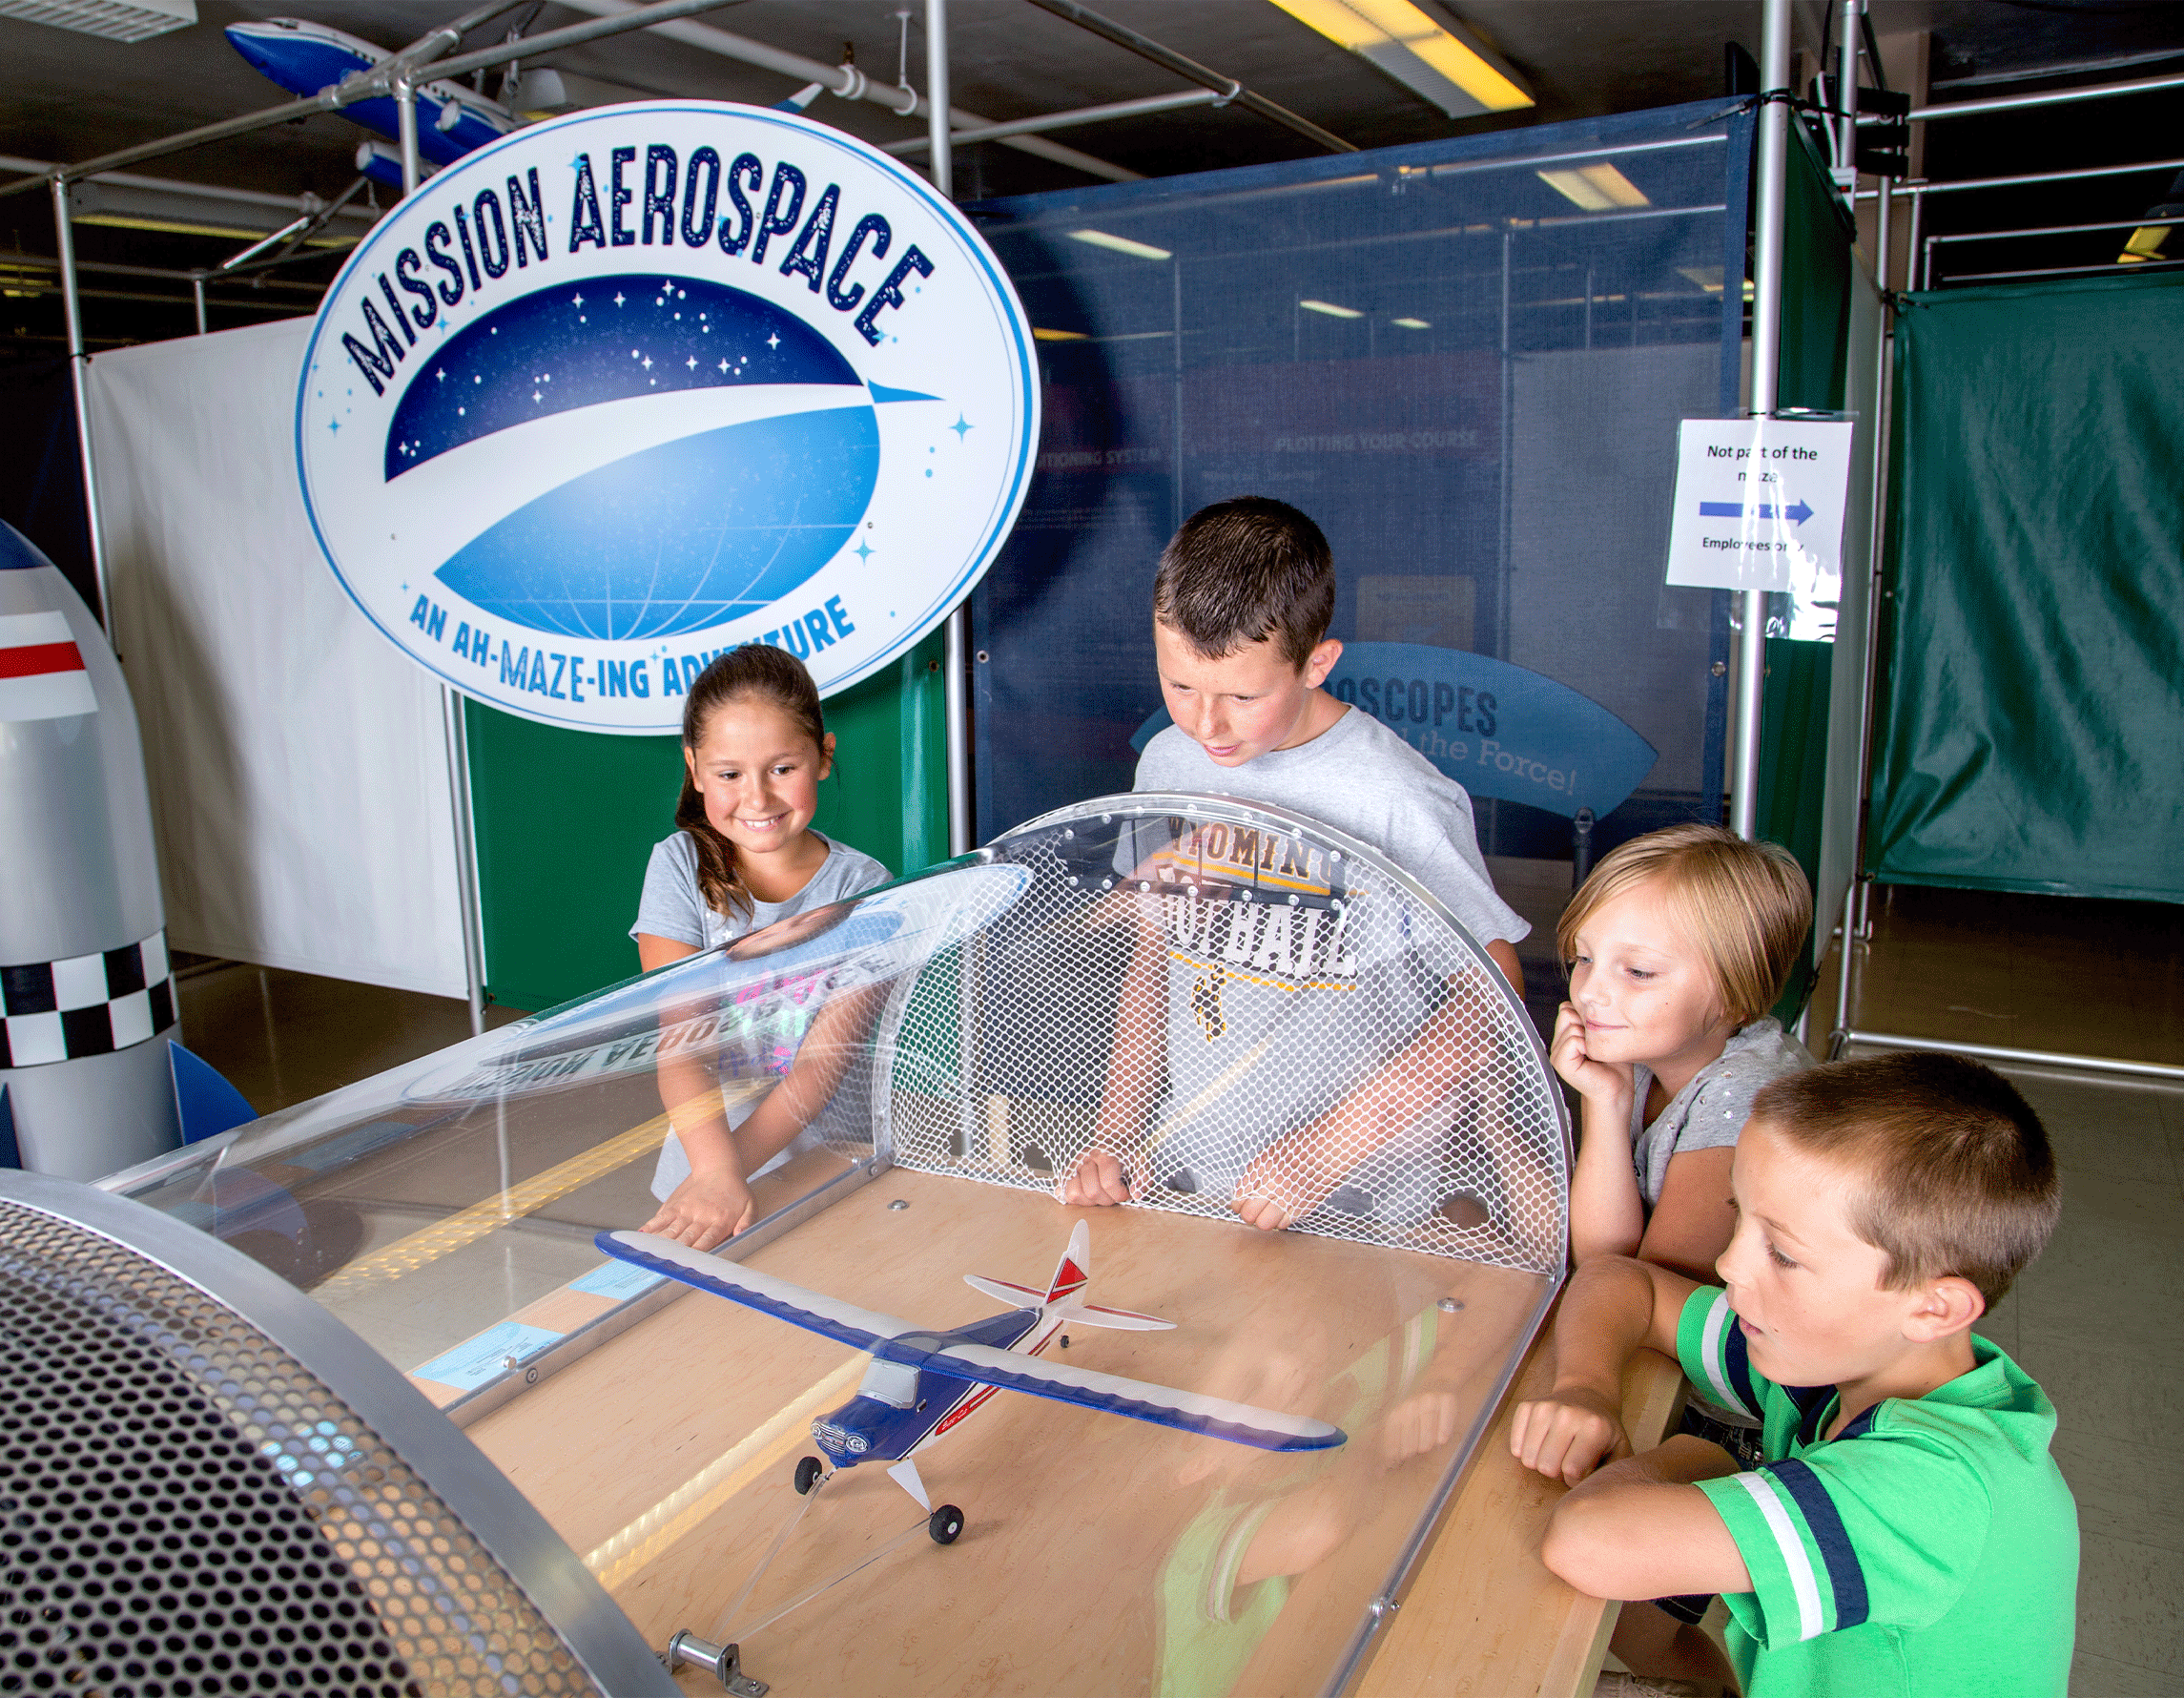 Kids playing with interactive exhibit in Mission Aerospace